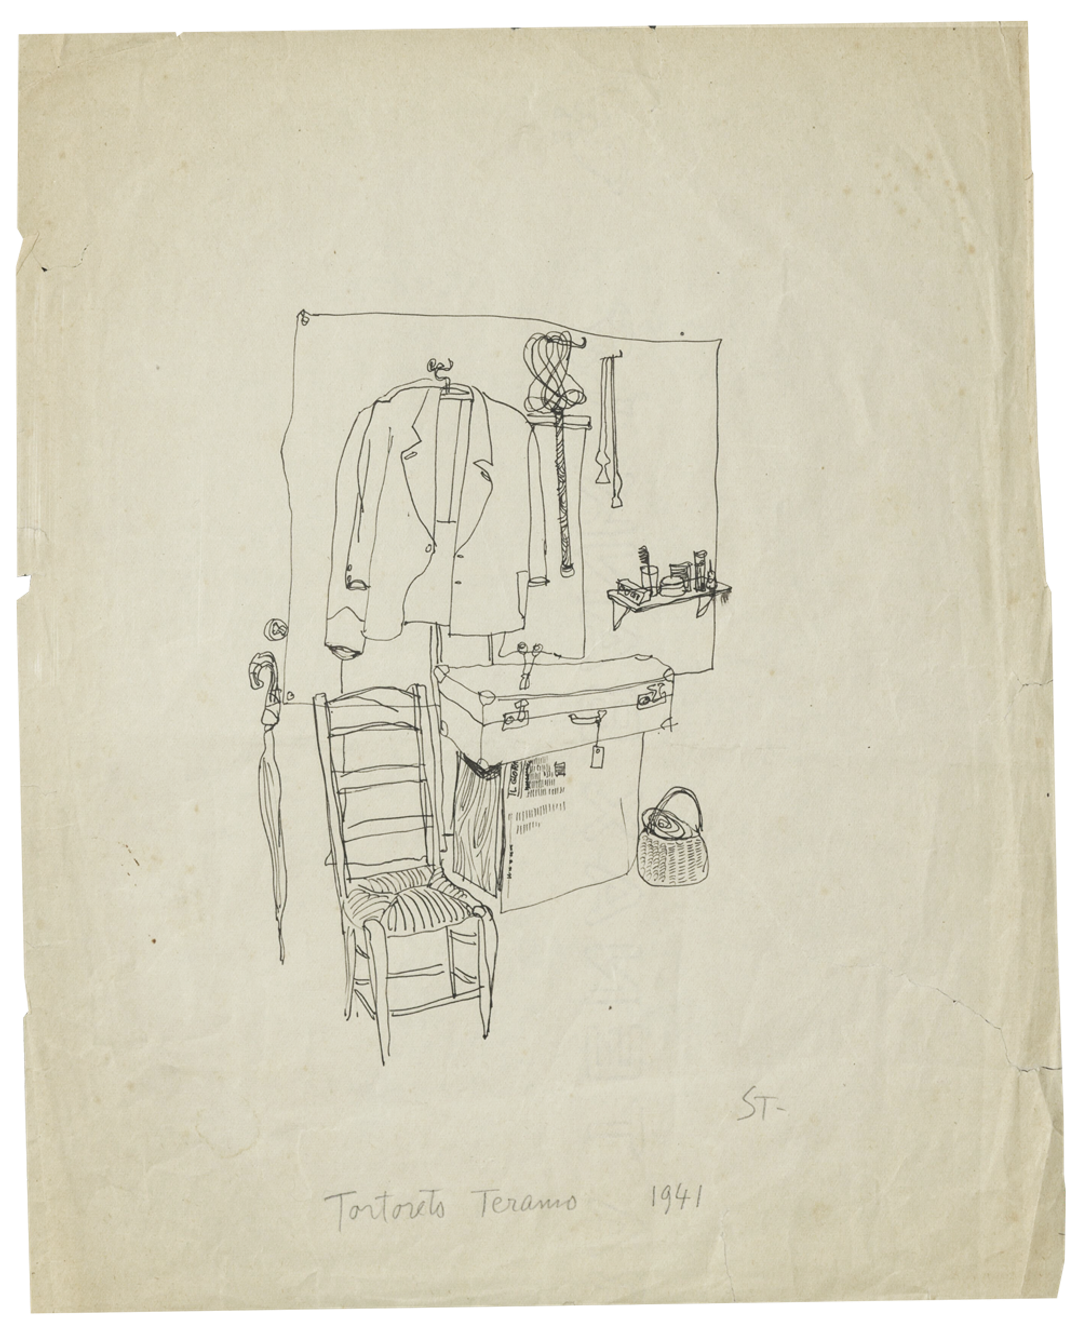 "We arrived in Tortoreto, in the Abruzzi, after two days of traveling, sleeping on benches in stations, and changing trains." A 1941 drawing shows some of Steinberg's possessions, not long after his arrival at Villa Tonelli.